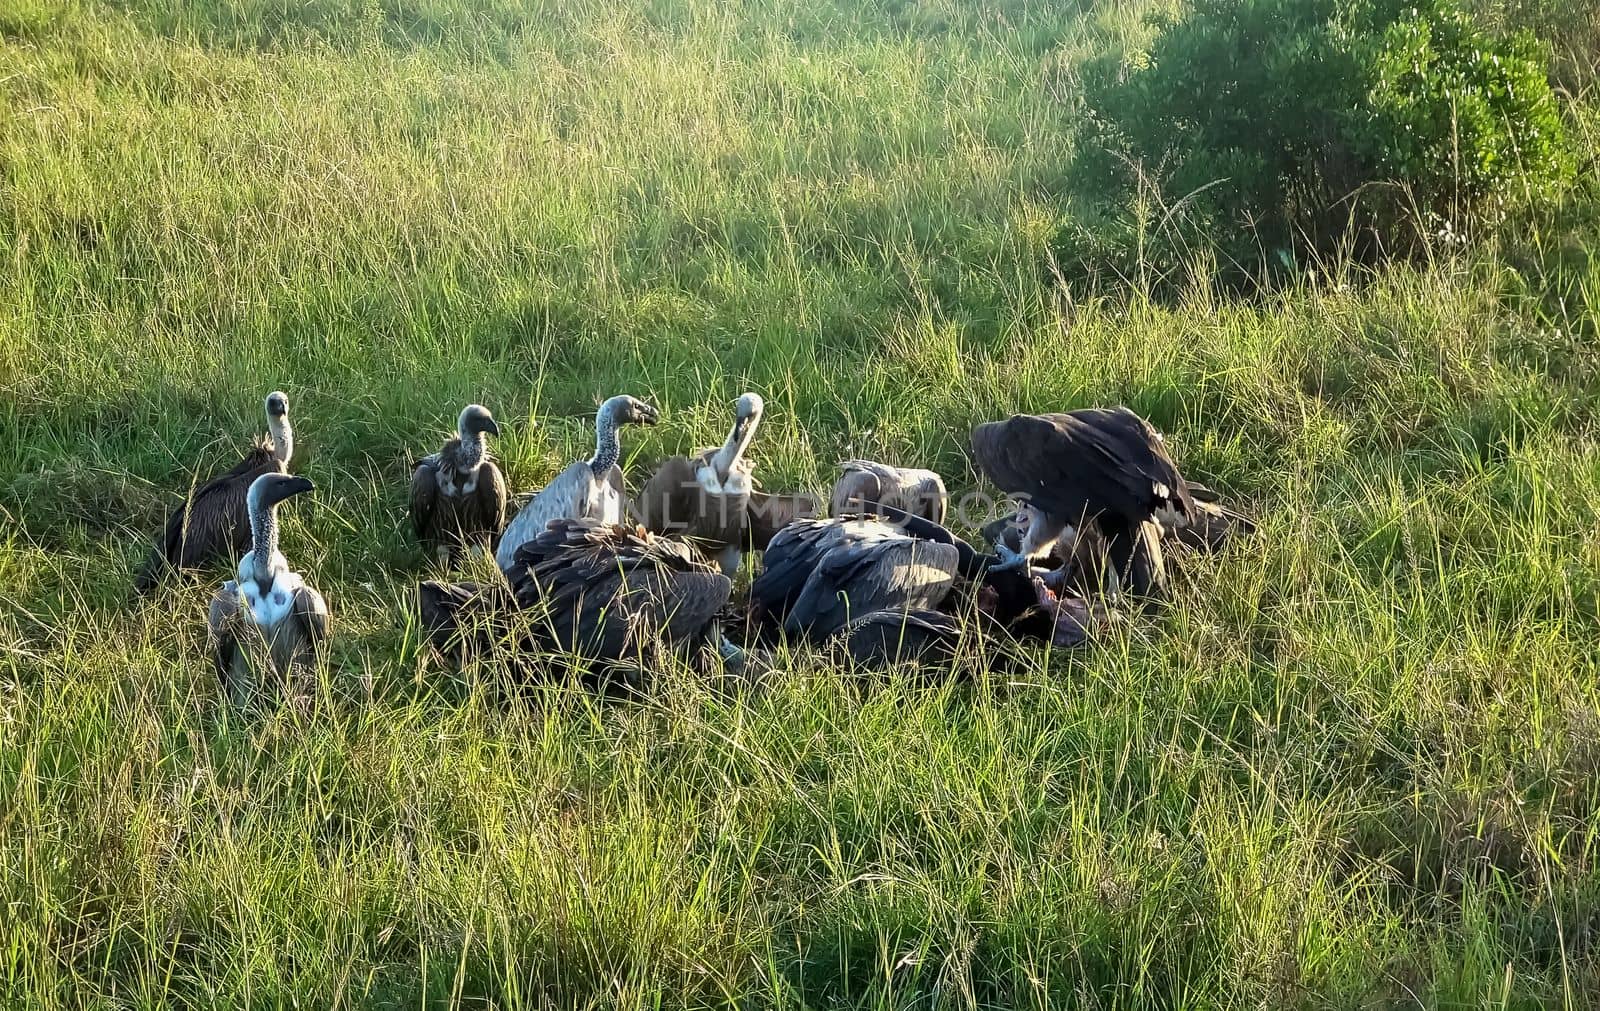 Numerous vultures fight over a carcass in the wilds of Africa